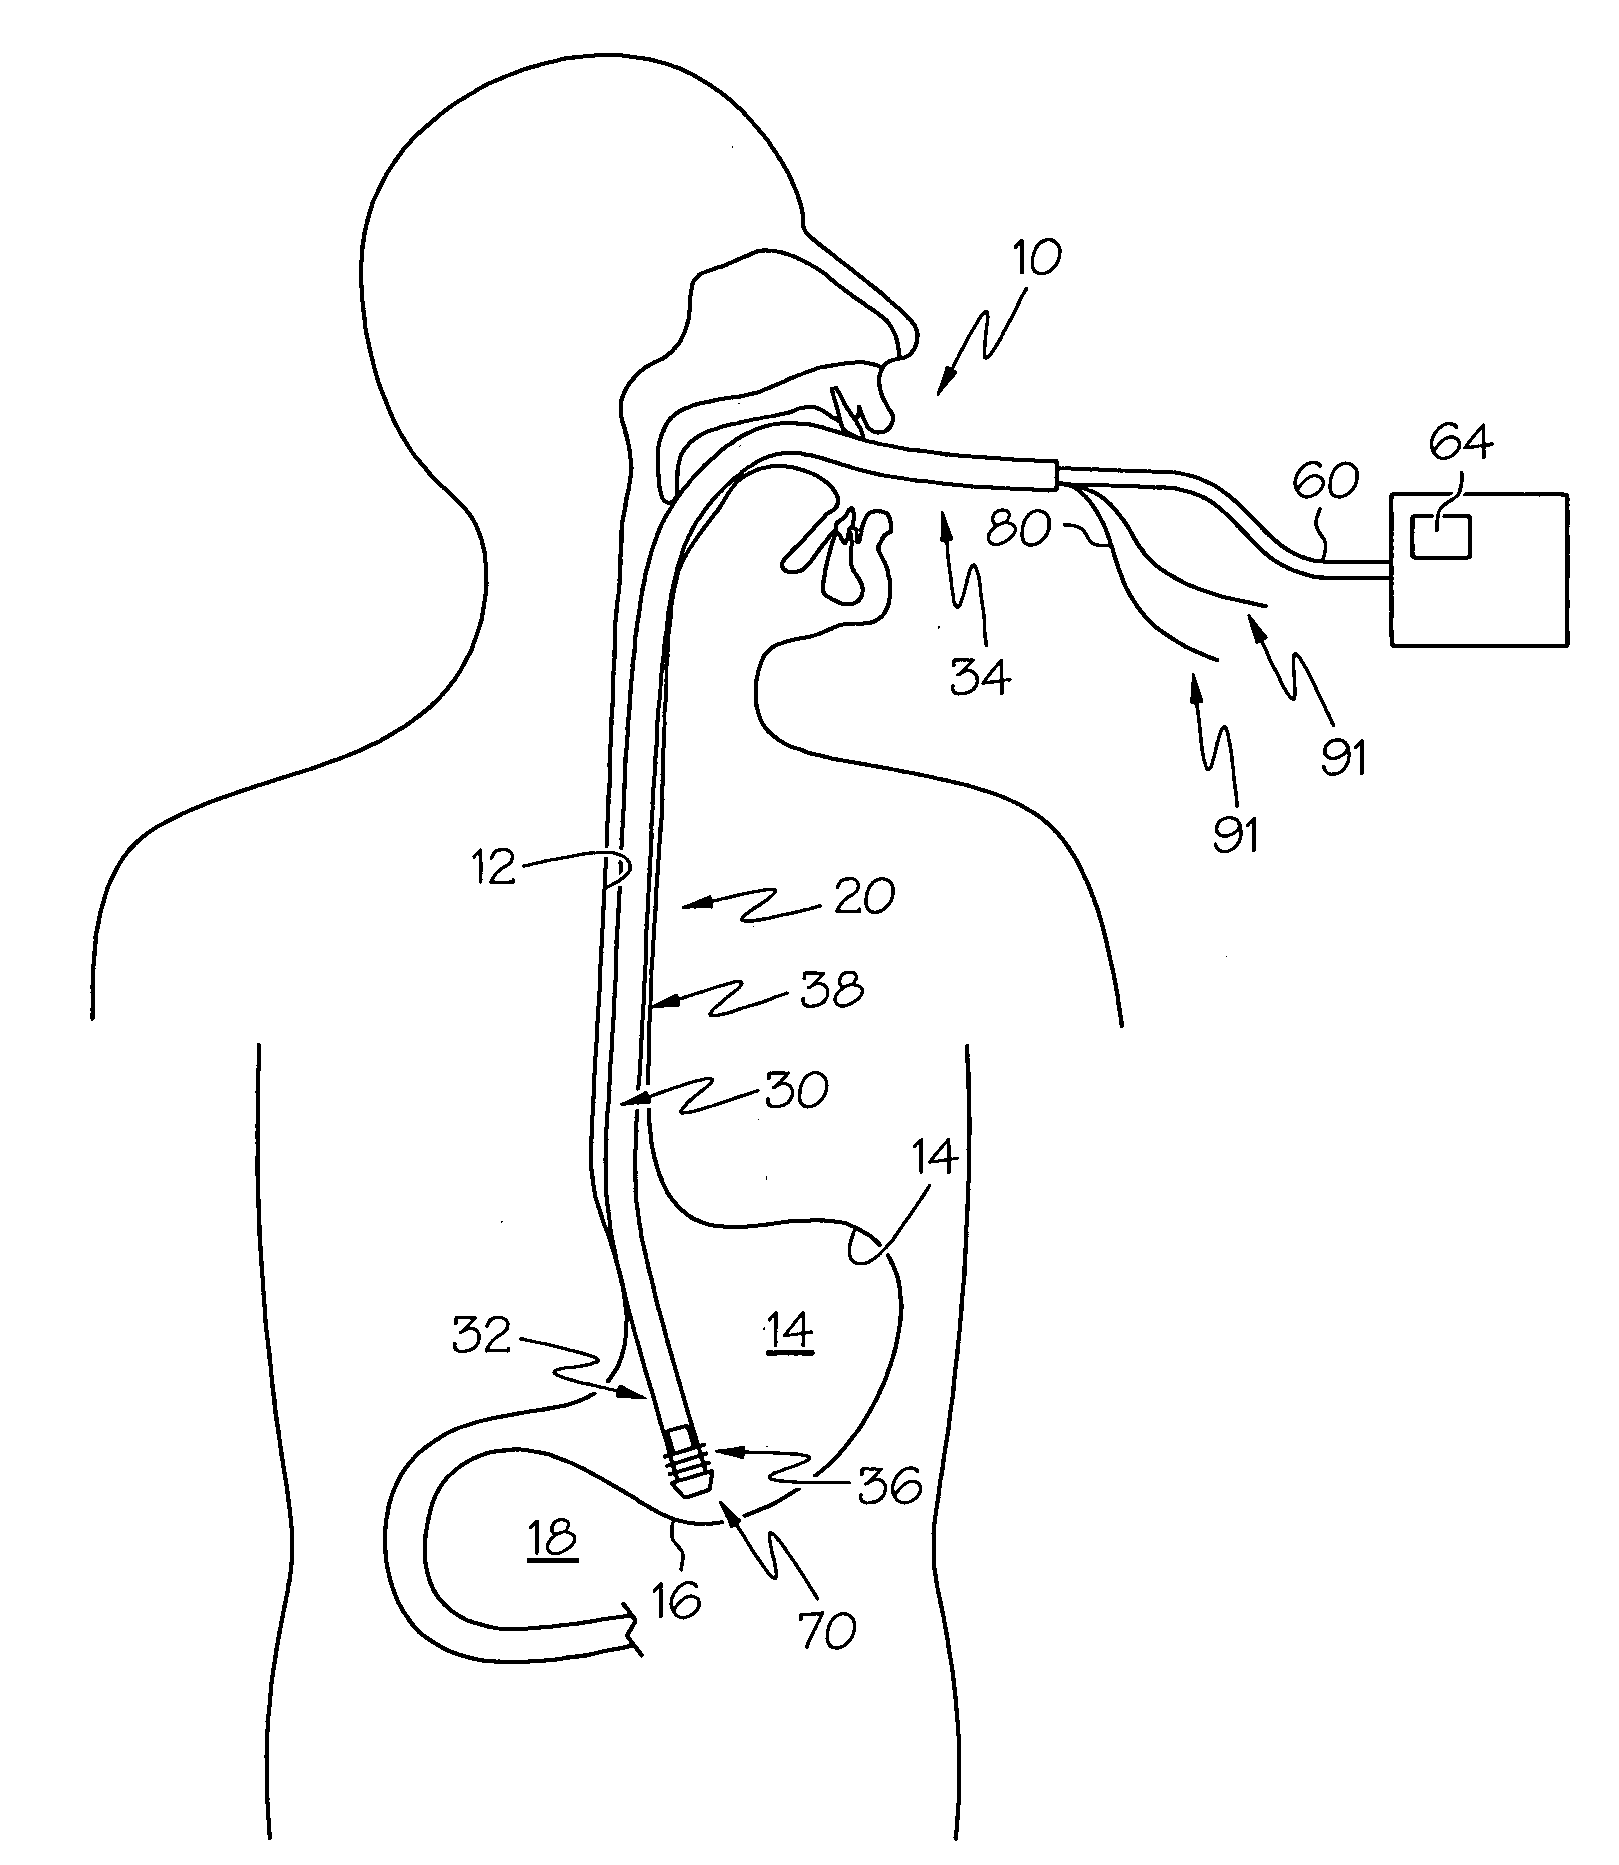 Detachable distal overtube section and methods for forming a sealable opening in the wall of an organ